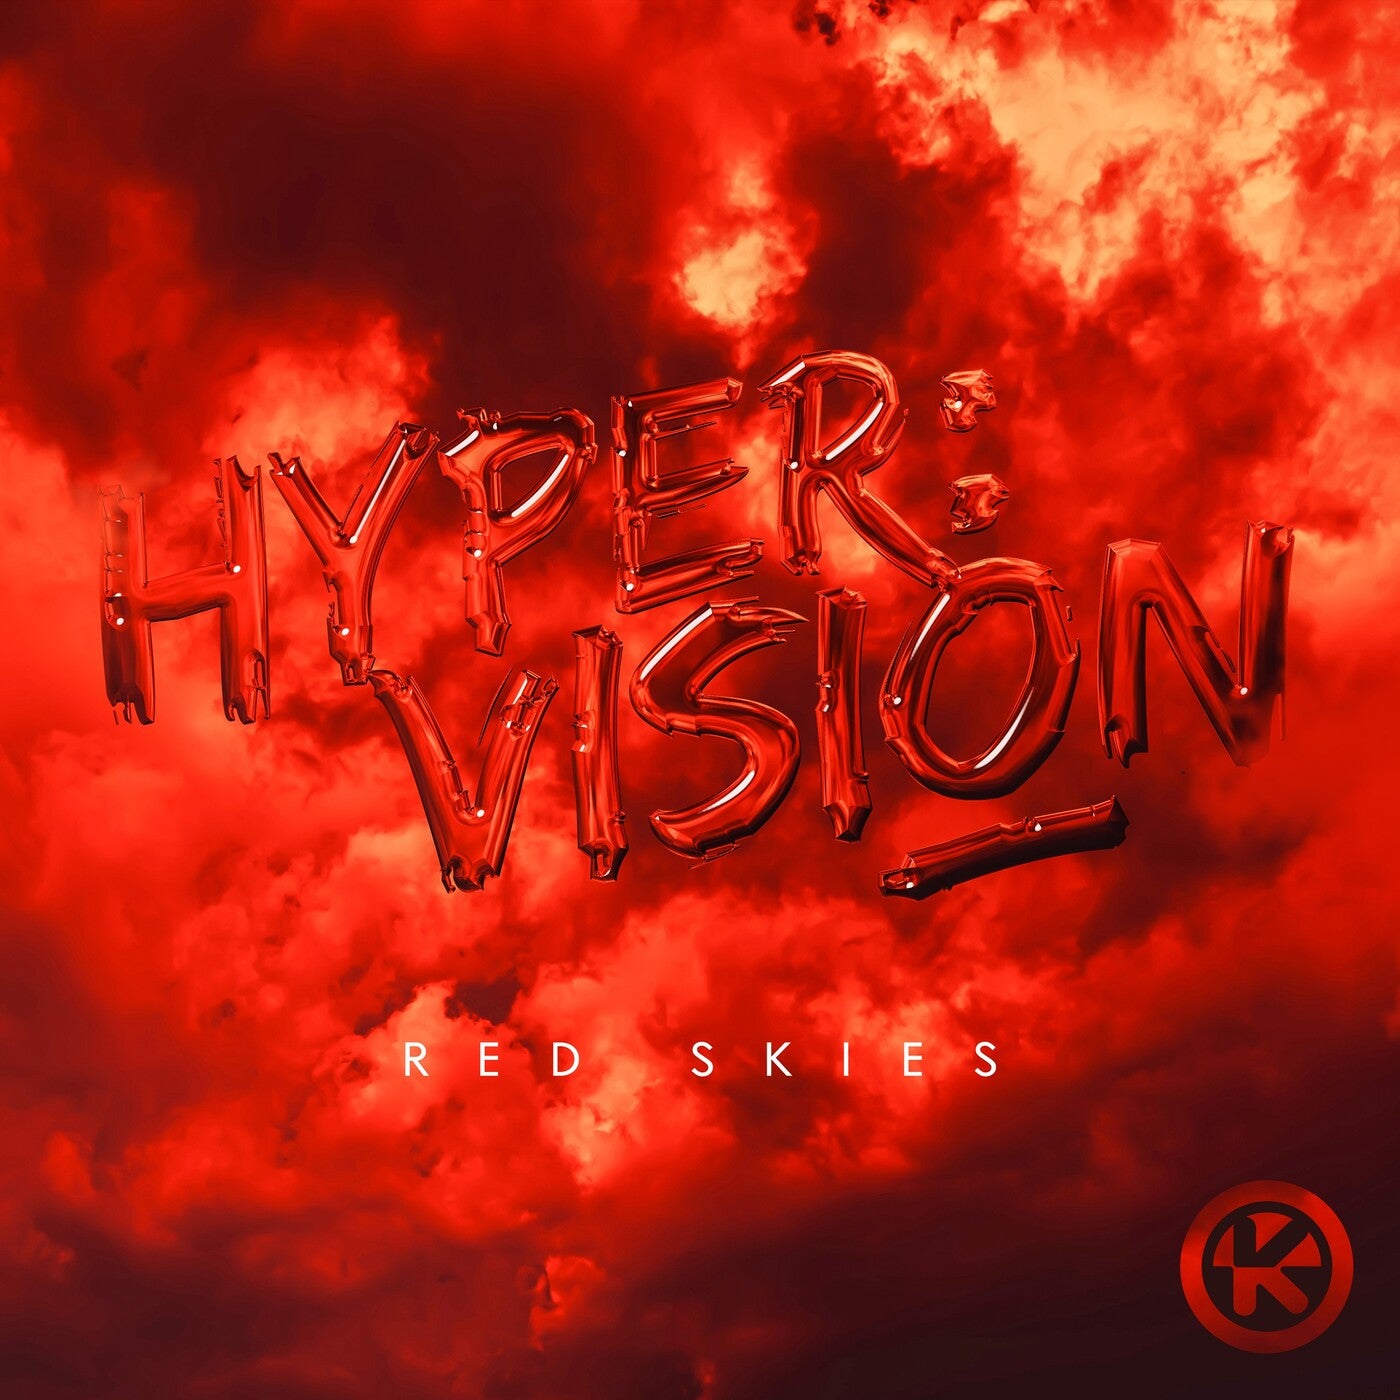 Hypervision - Red Skies (matchy Extended Remix) on Revolution Radio